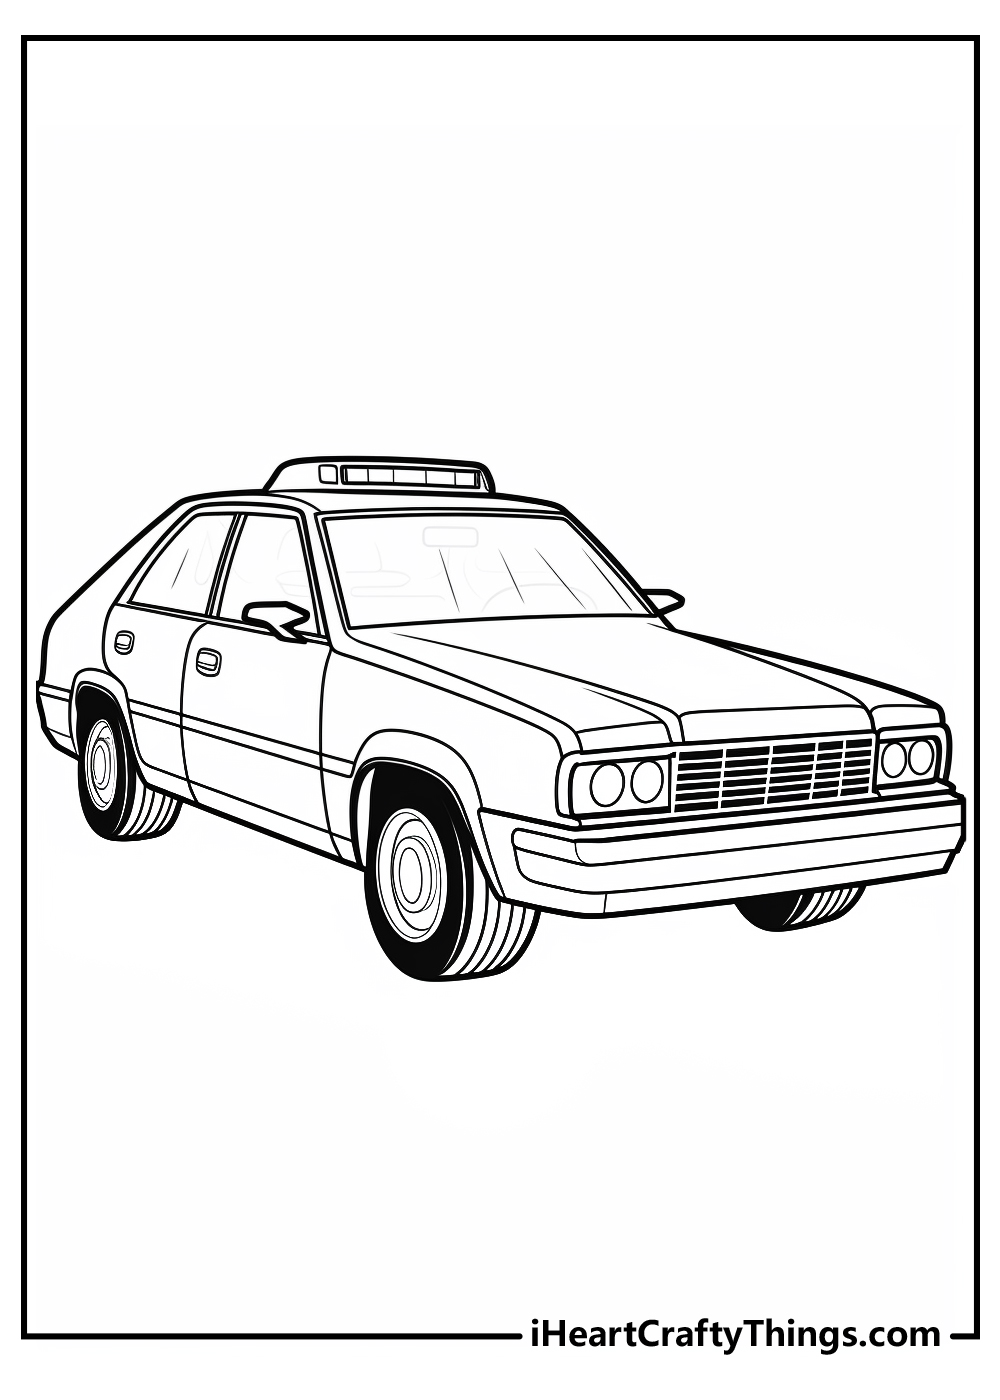 black-and-white police car coloring sheet